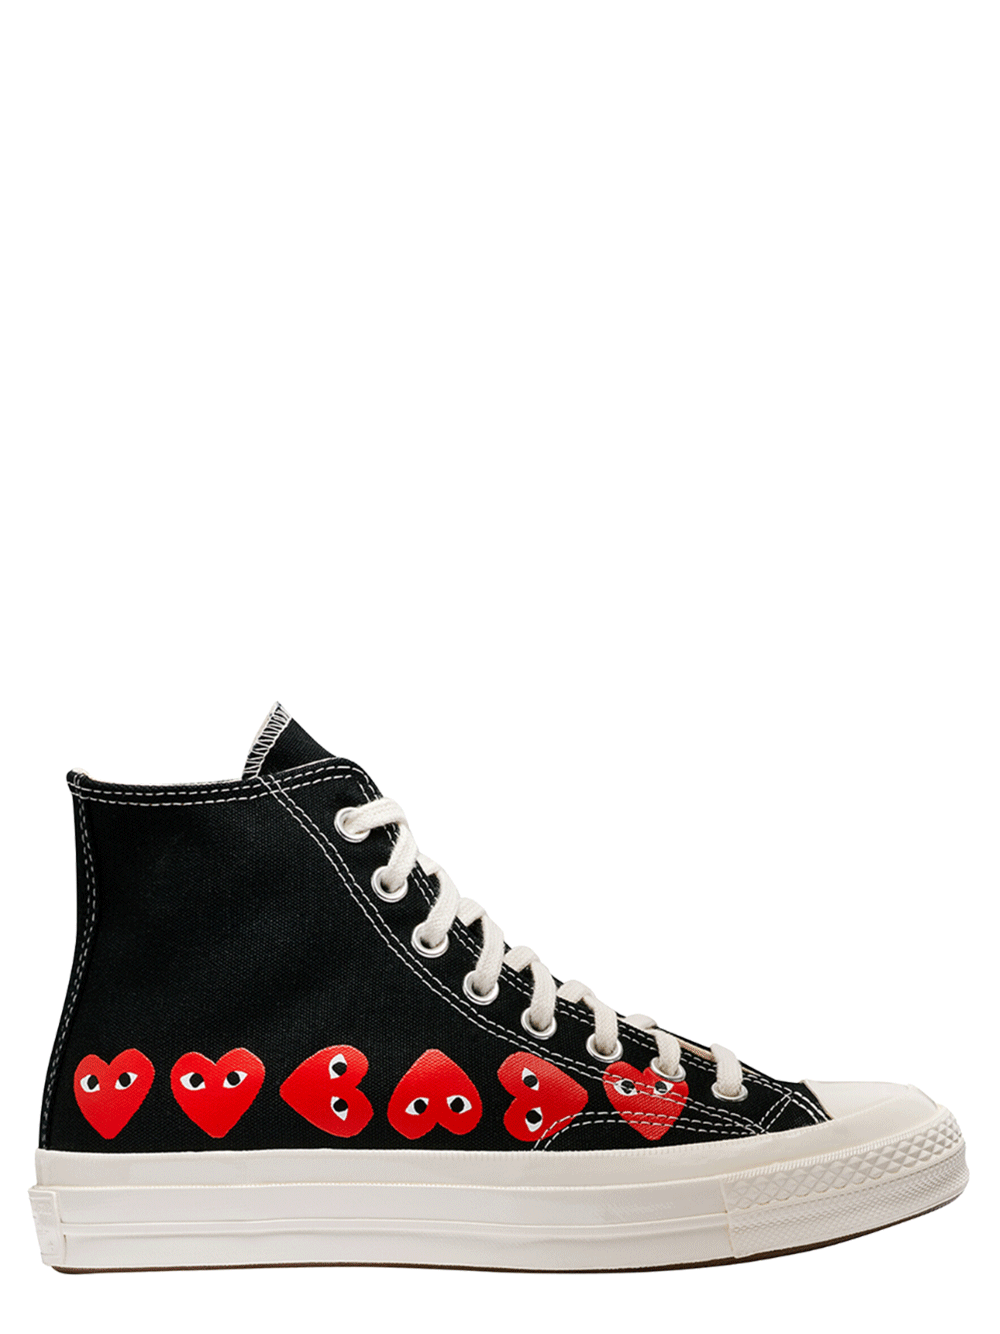 COMME-des-GARCONS-PLAY-CONVERSE-MULTI-HEART-Chuck-Taylor-All-Star-_70-High-Sneakers-1